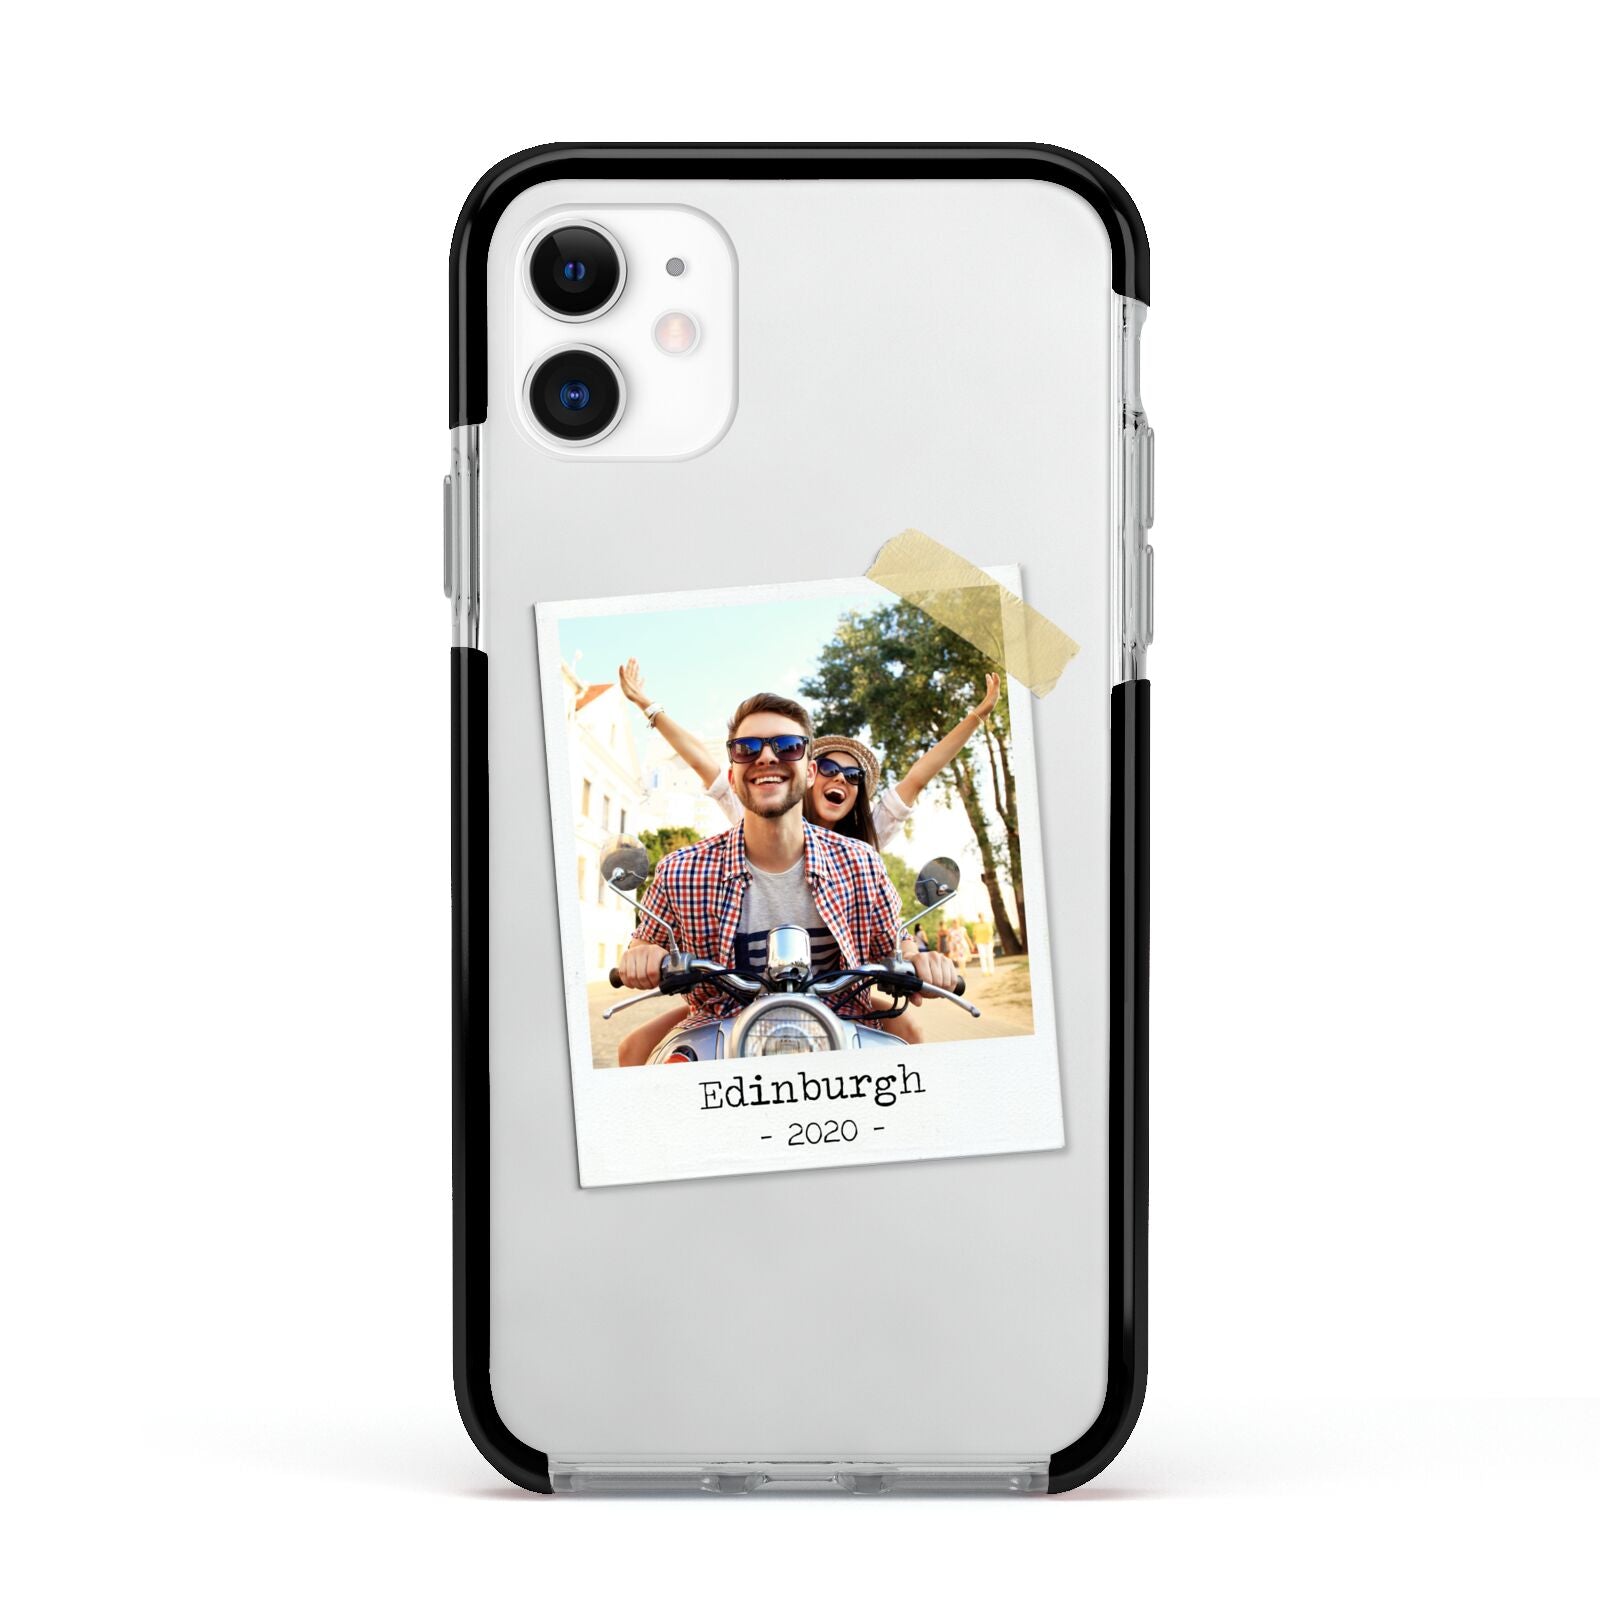 Taped Holiday Snap Photo Upload Apple iPhone 11 in White with Black Impact Case